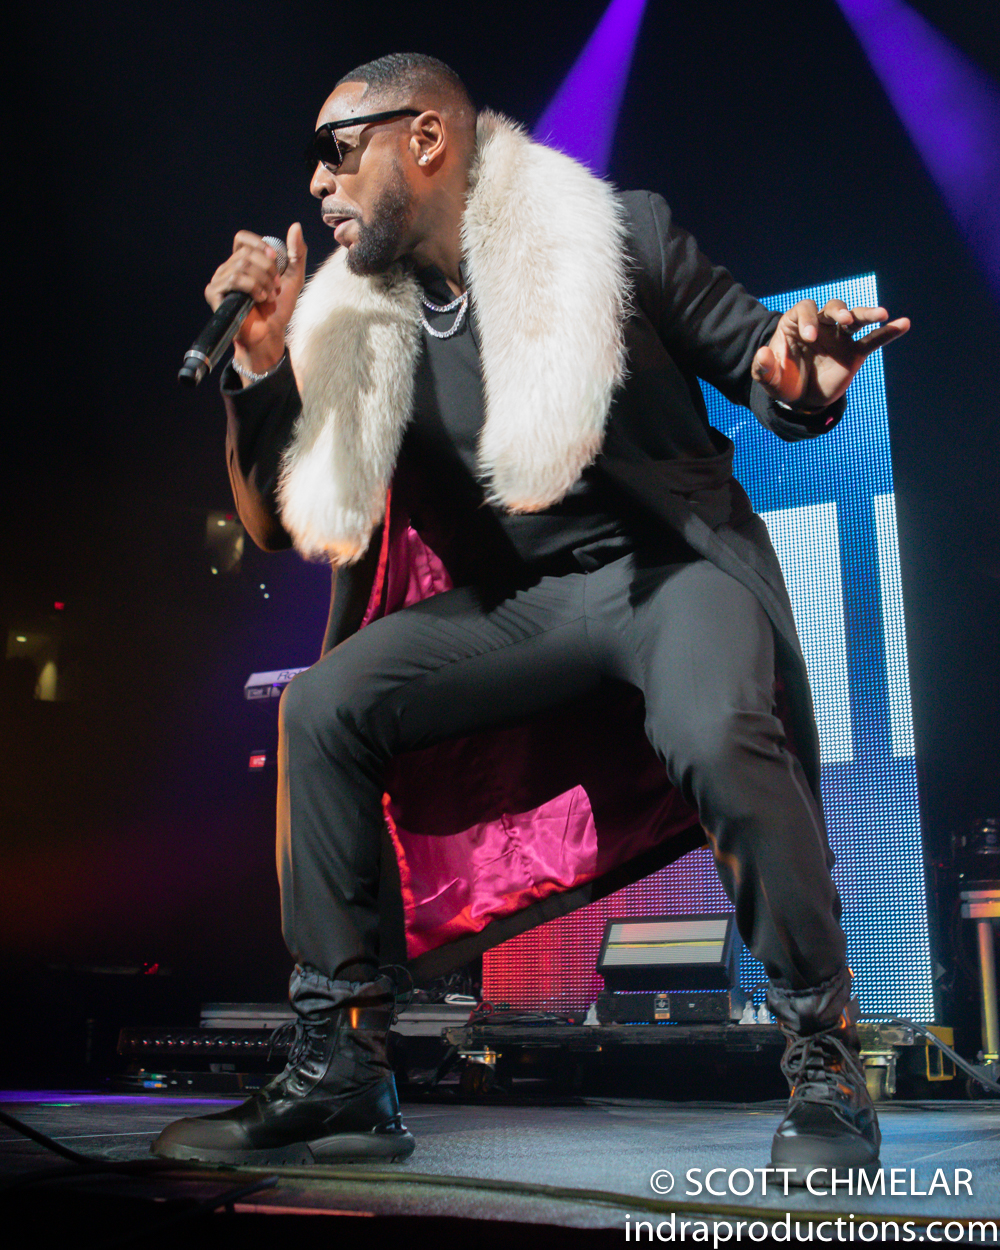 Fantasia "The Sketchbook Tour" with Robin Thicke, Tank and The Bonfyre at PNC in Raleigh, NC Dec. 1, 2019. Photos by Scott Chmelar for INDRA Magazine.